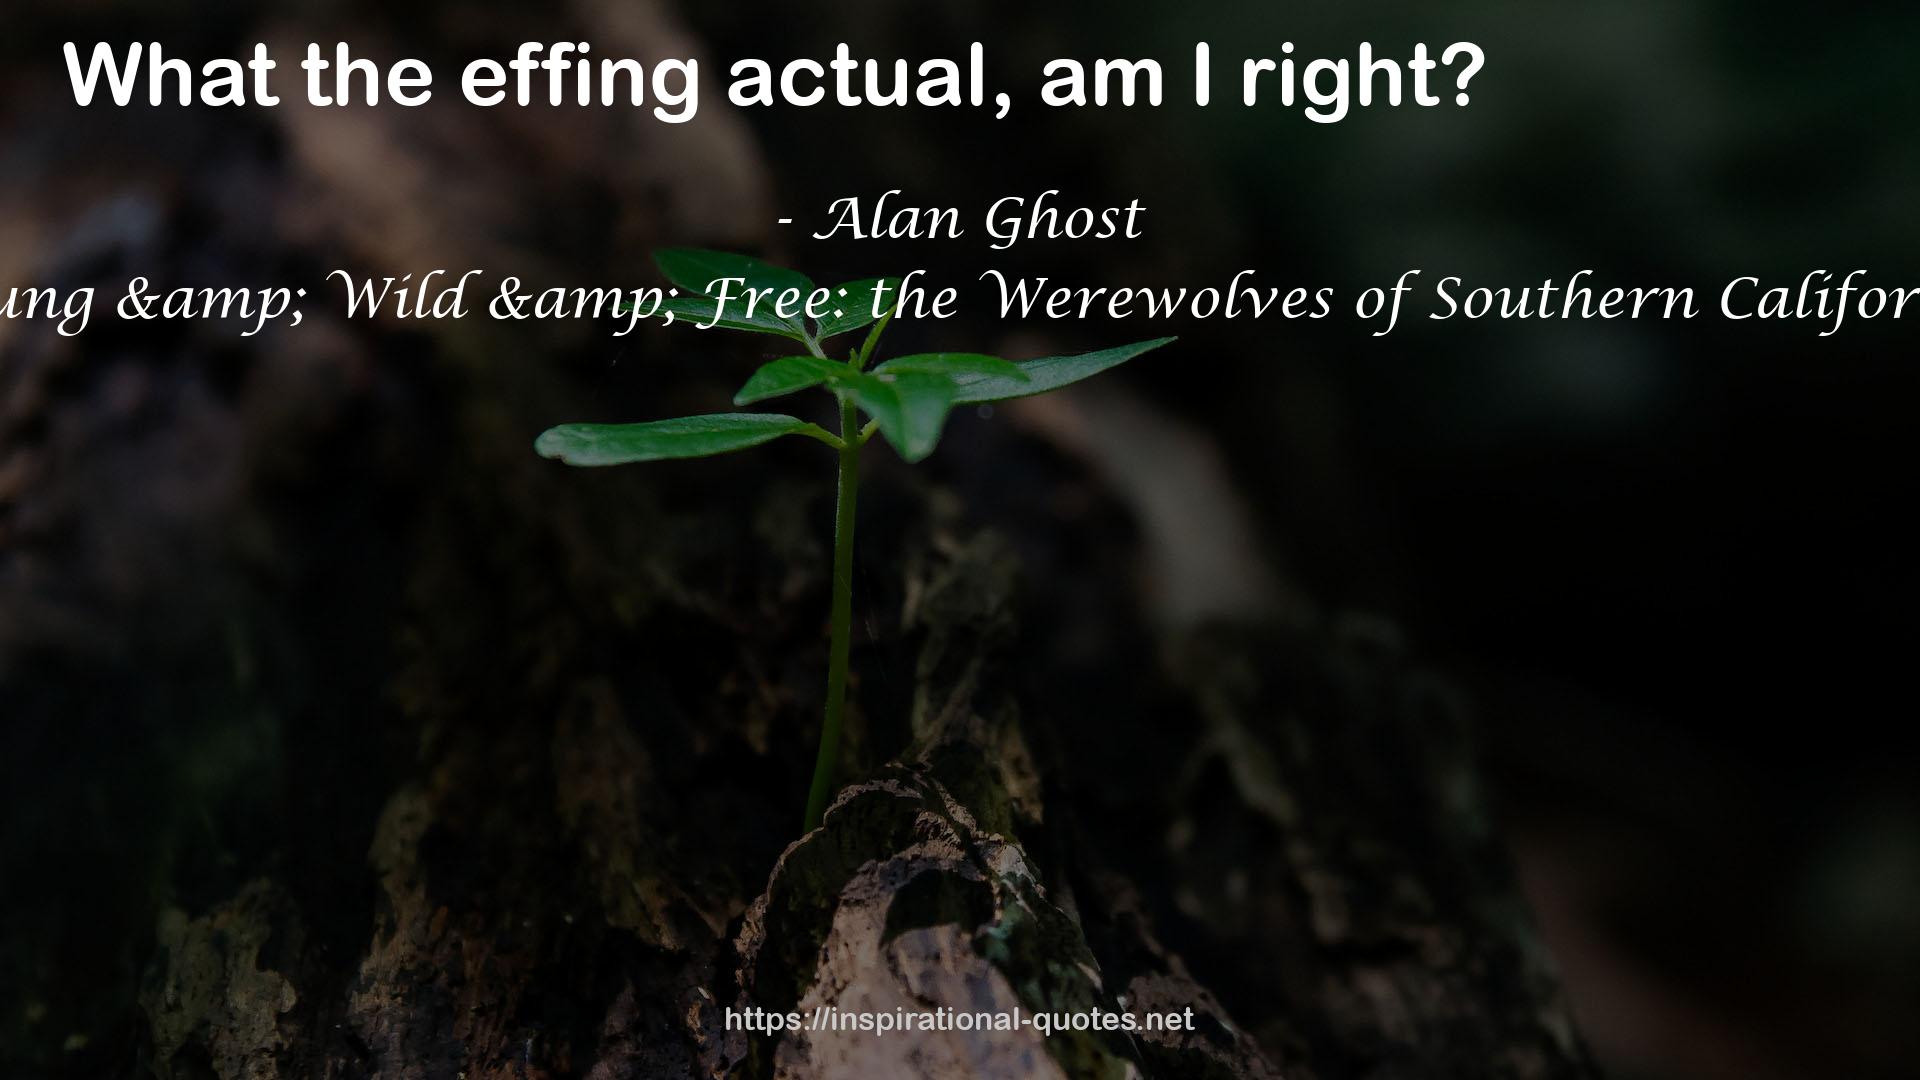 Alan Ghost QUOTES